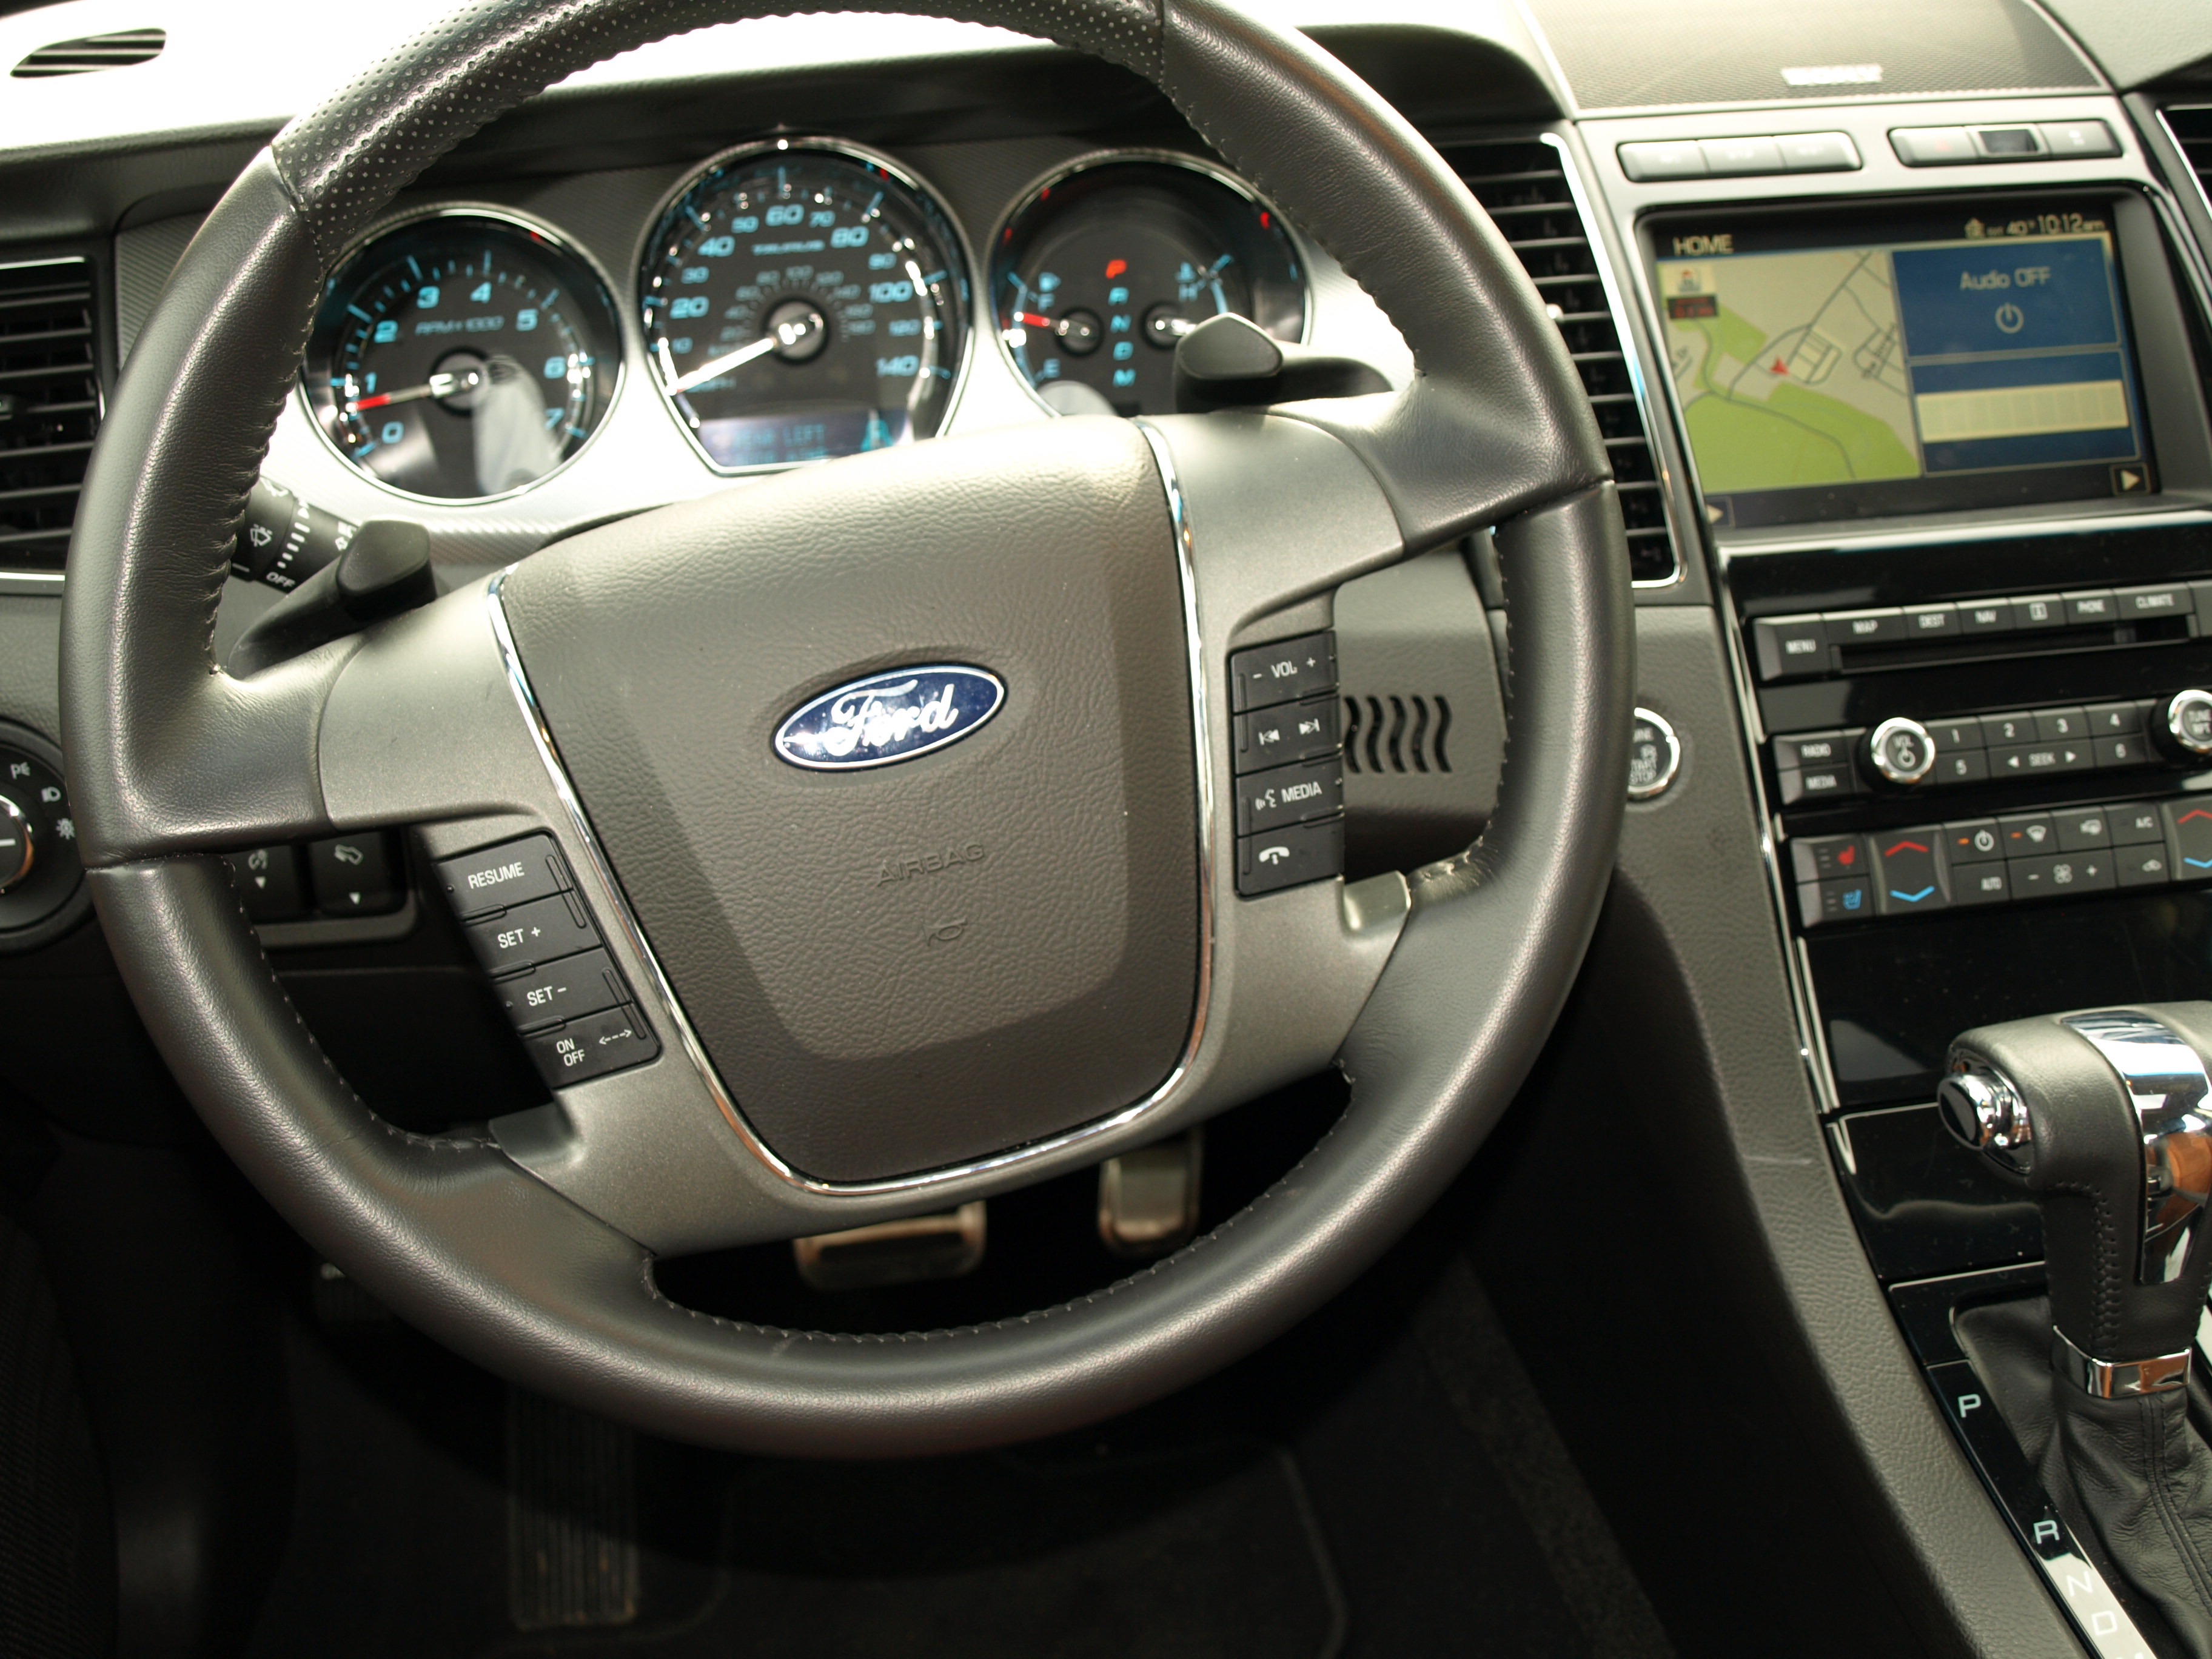 2010 Ford Taurus Sho Awd Review